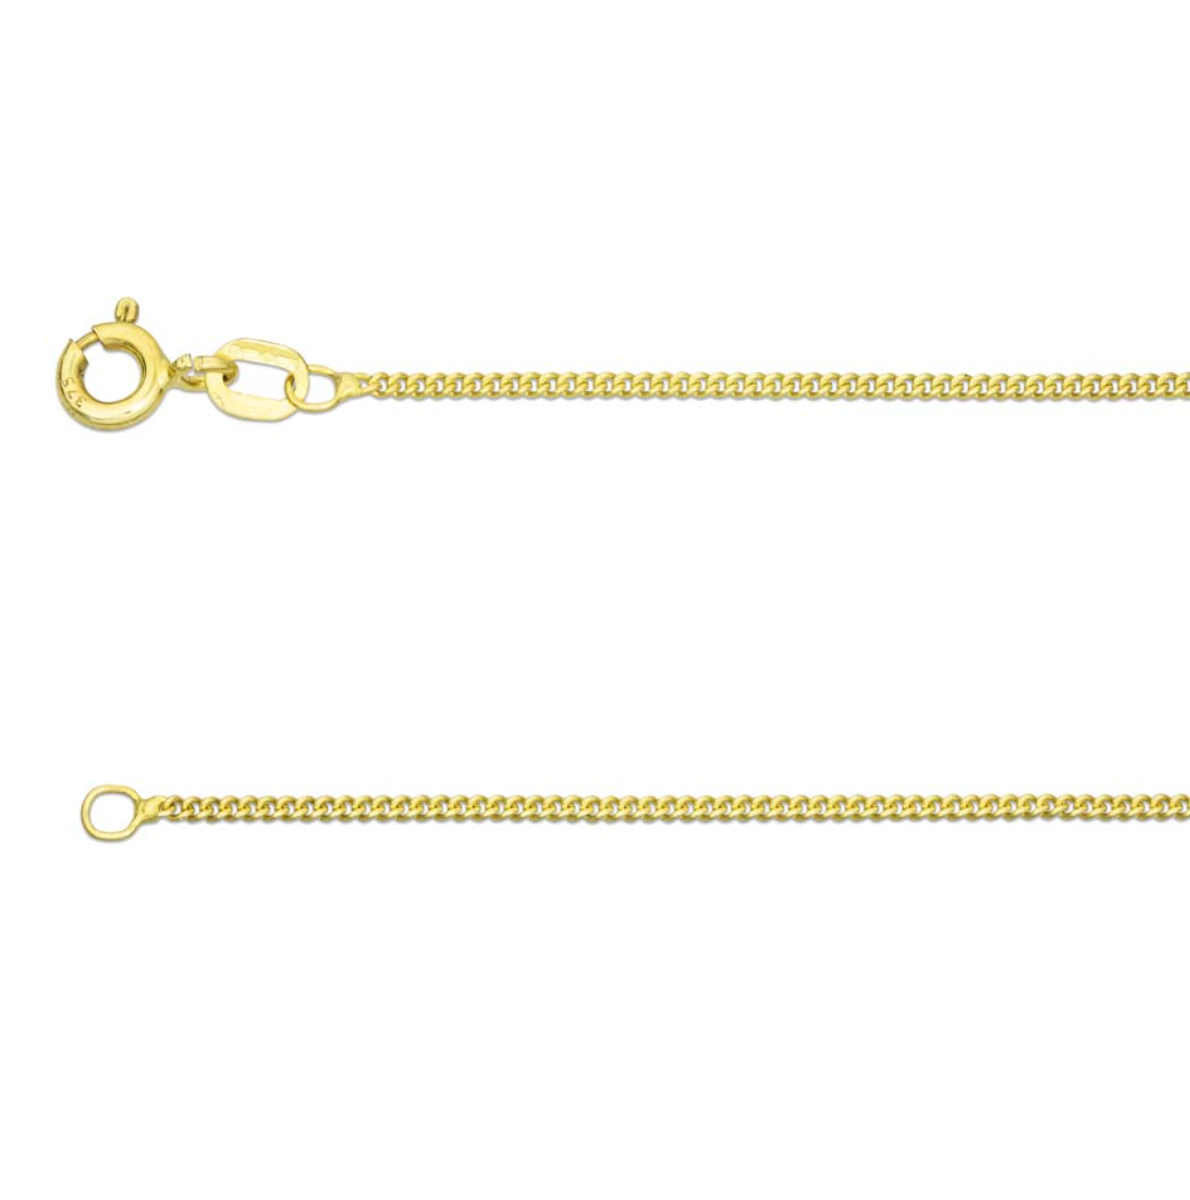 An image of a 9ct yellow gold trace chain.